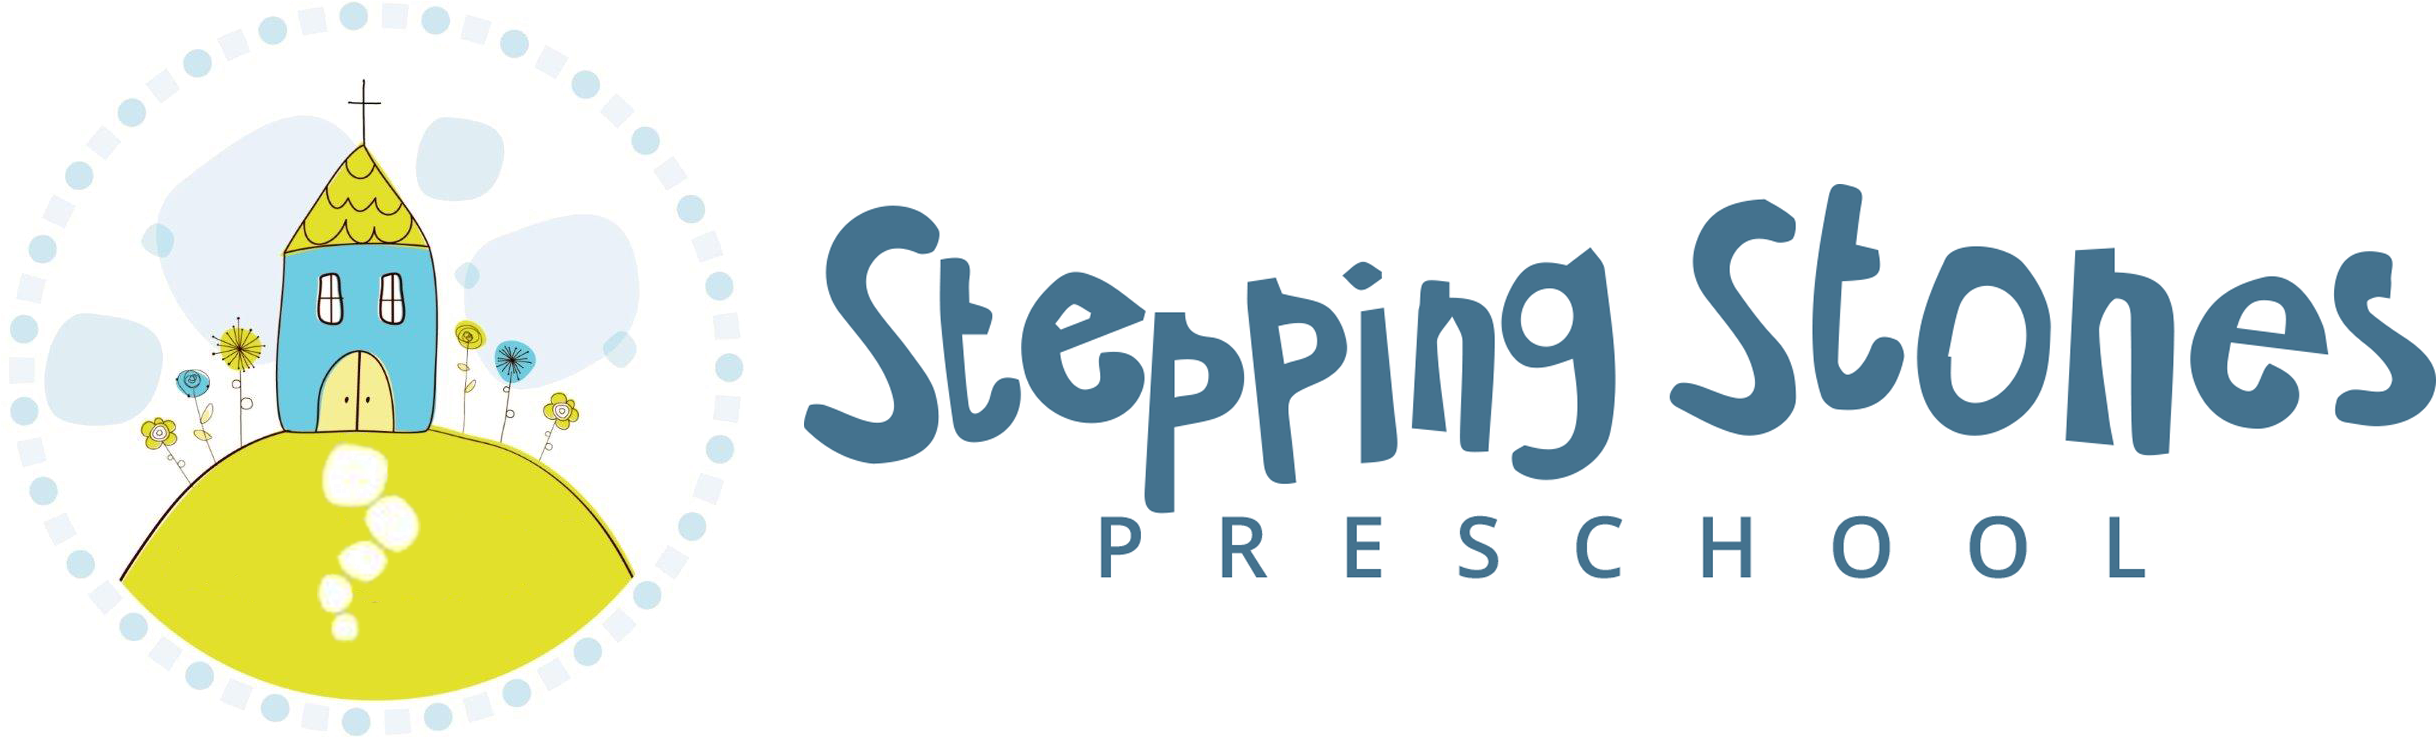 Stepping Stone Pre School Logos (2532x768), Png Download